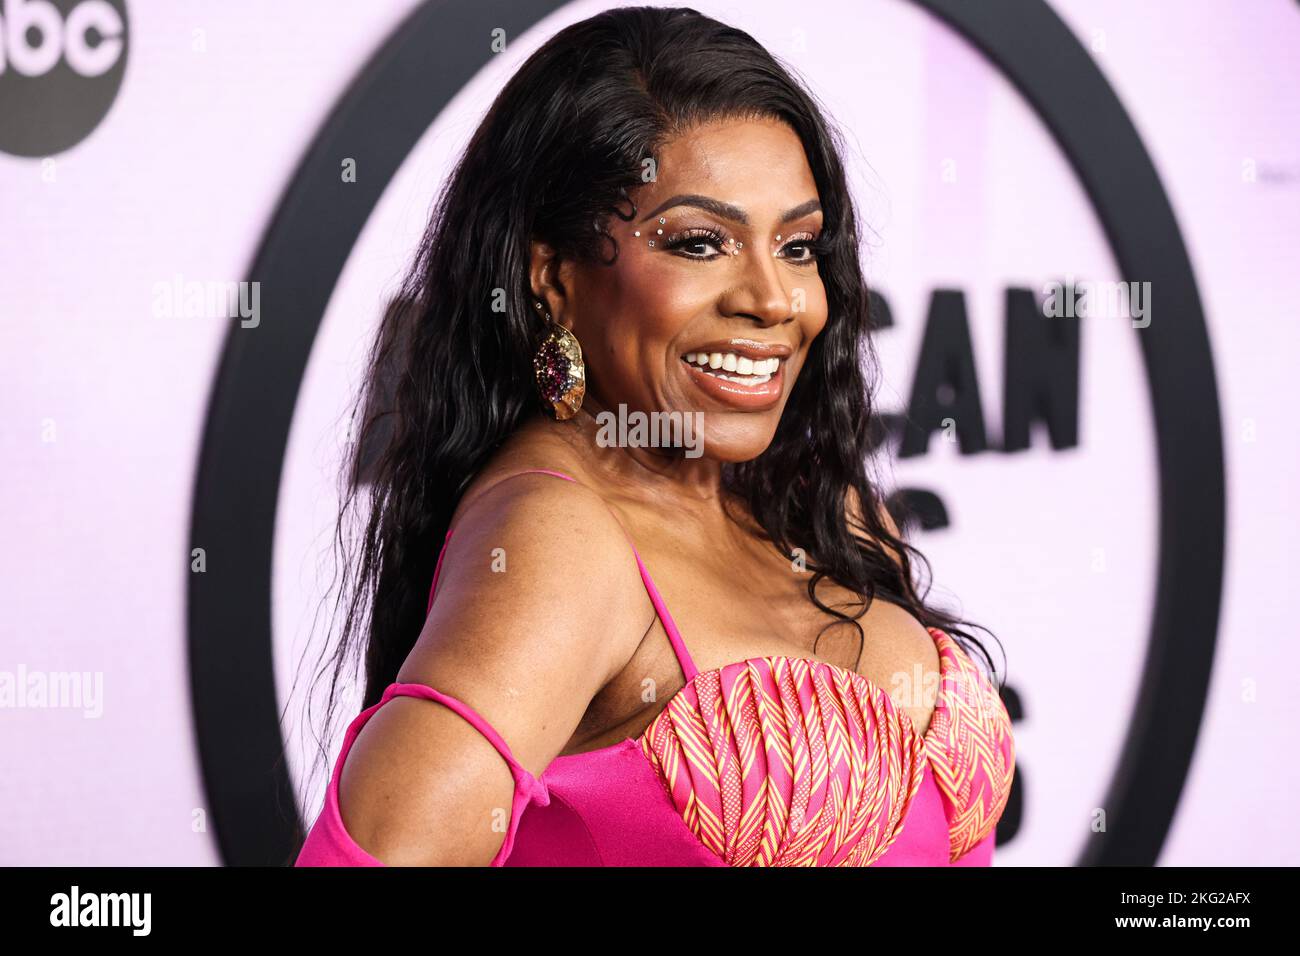 Los Angeles, United States. 20th Nov, 2022. LOS ANGELES, CALIFORNIA, USA - NOVEMBER 20: Sheryl Lee Ralph arrives at the 2022 American Music Awards (50th Annual American Music Awards) held at Microsoft Theater at L.A. Live on November 20, 2022 in Los Angeles, California, United States. (Photo by Xavier Collin/Image Press Agency) Credit: Image Press Agency/Alamy Live News Stock Photo